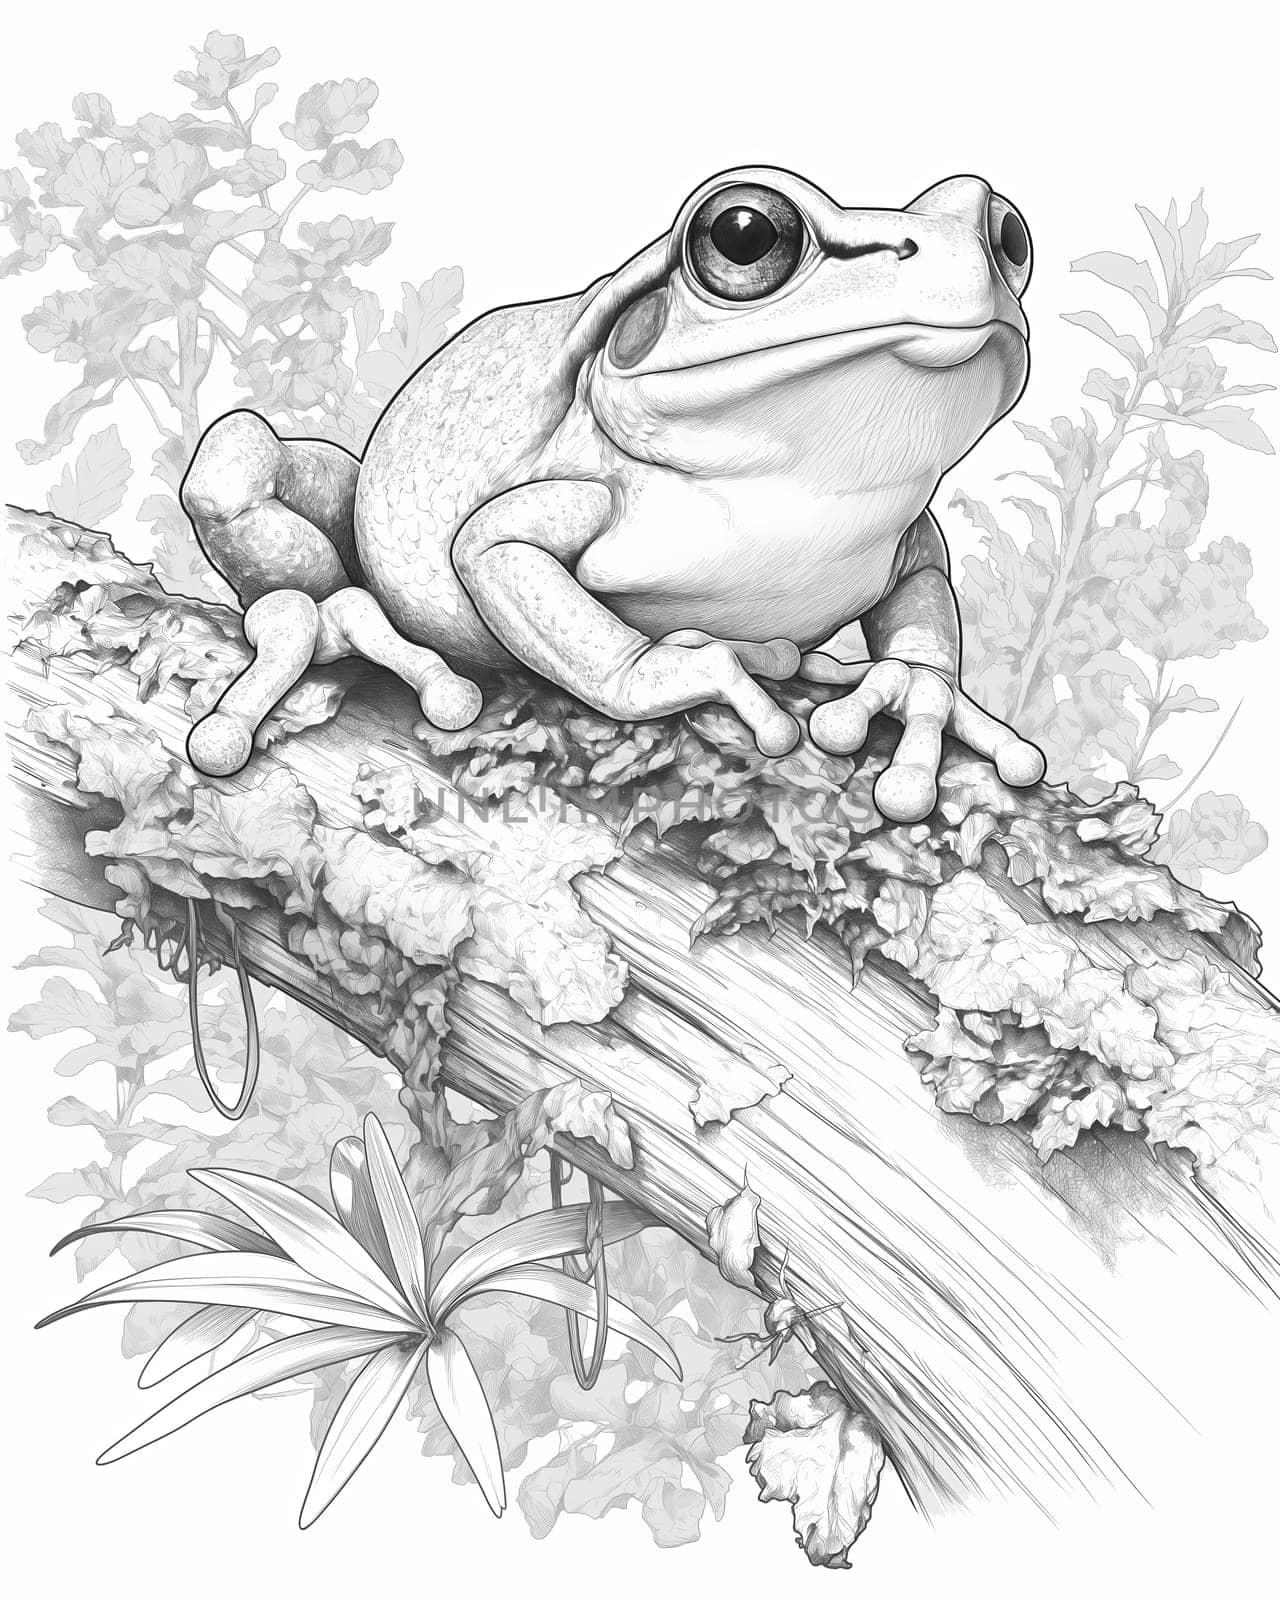 Coloring book for kids, animal coloring, frog. by Fischeron